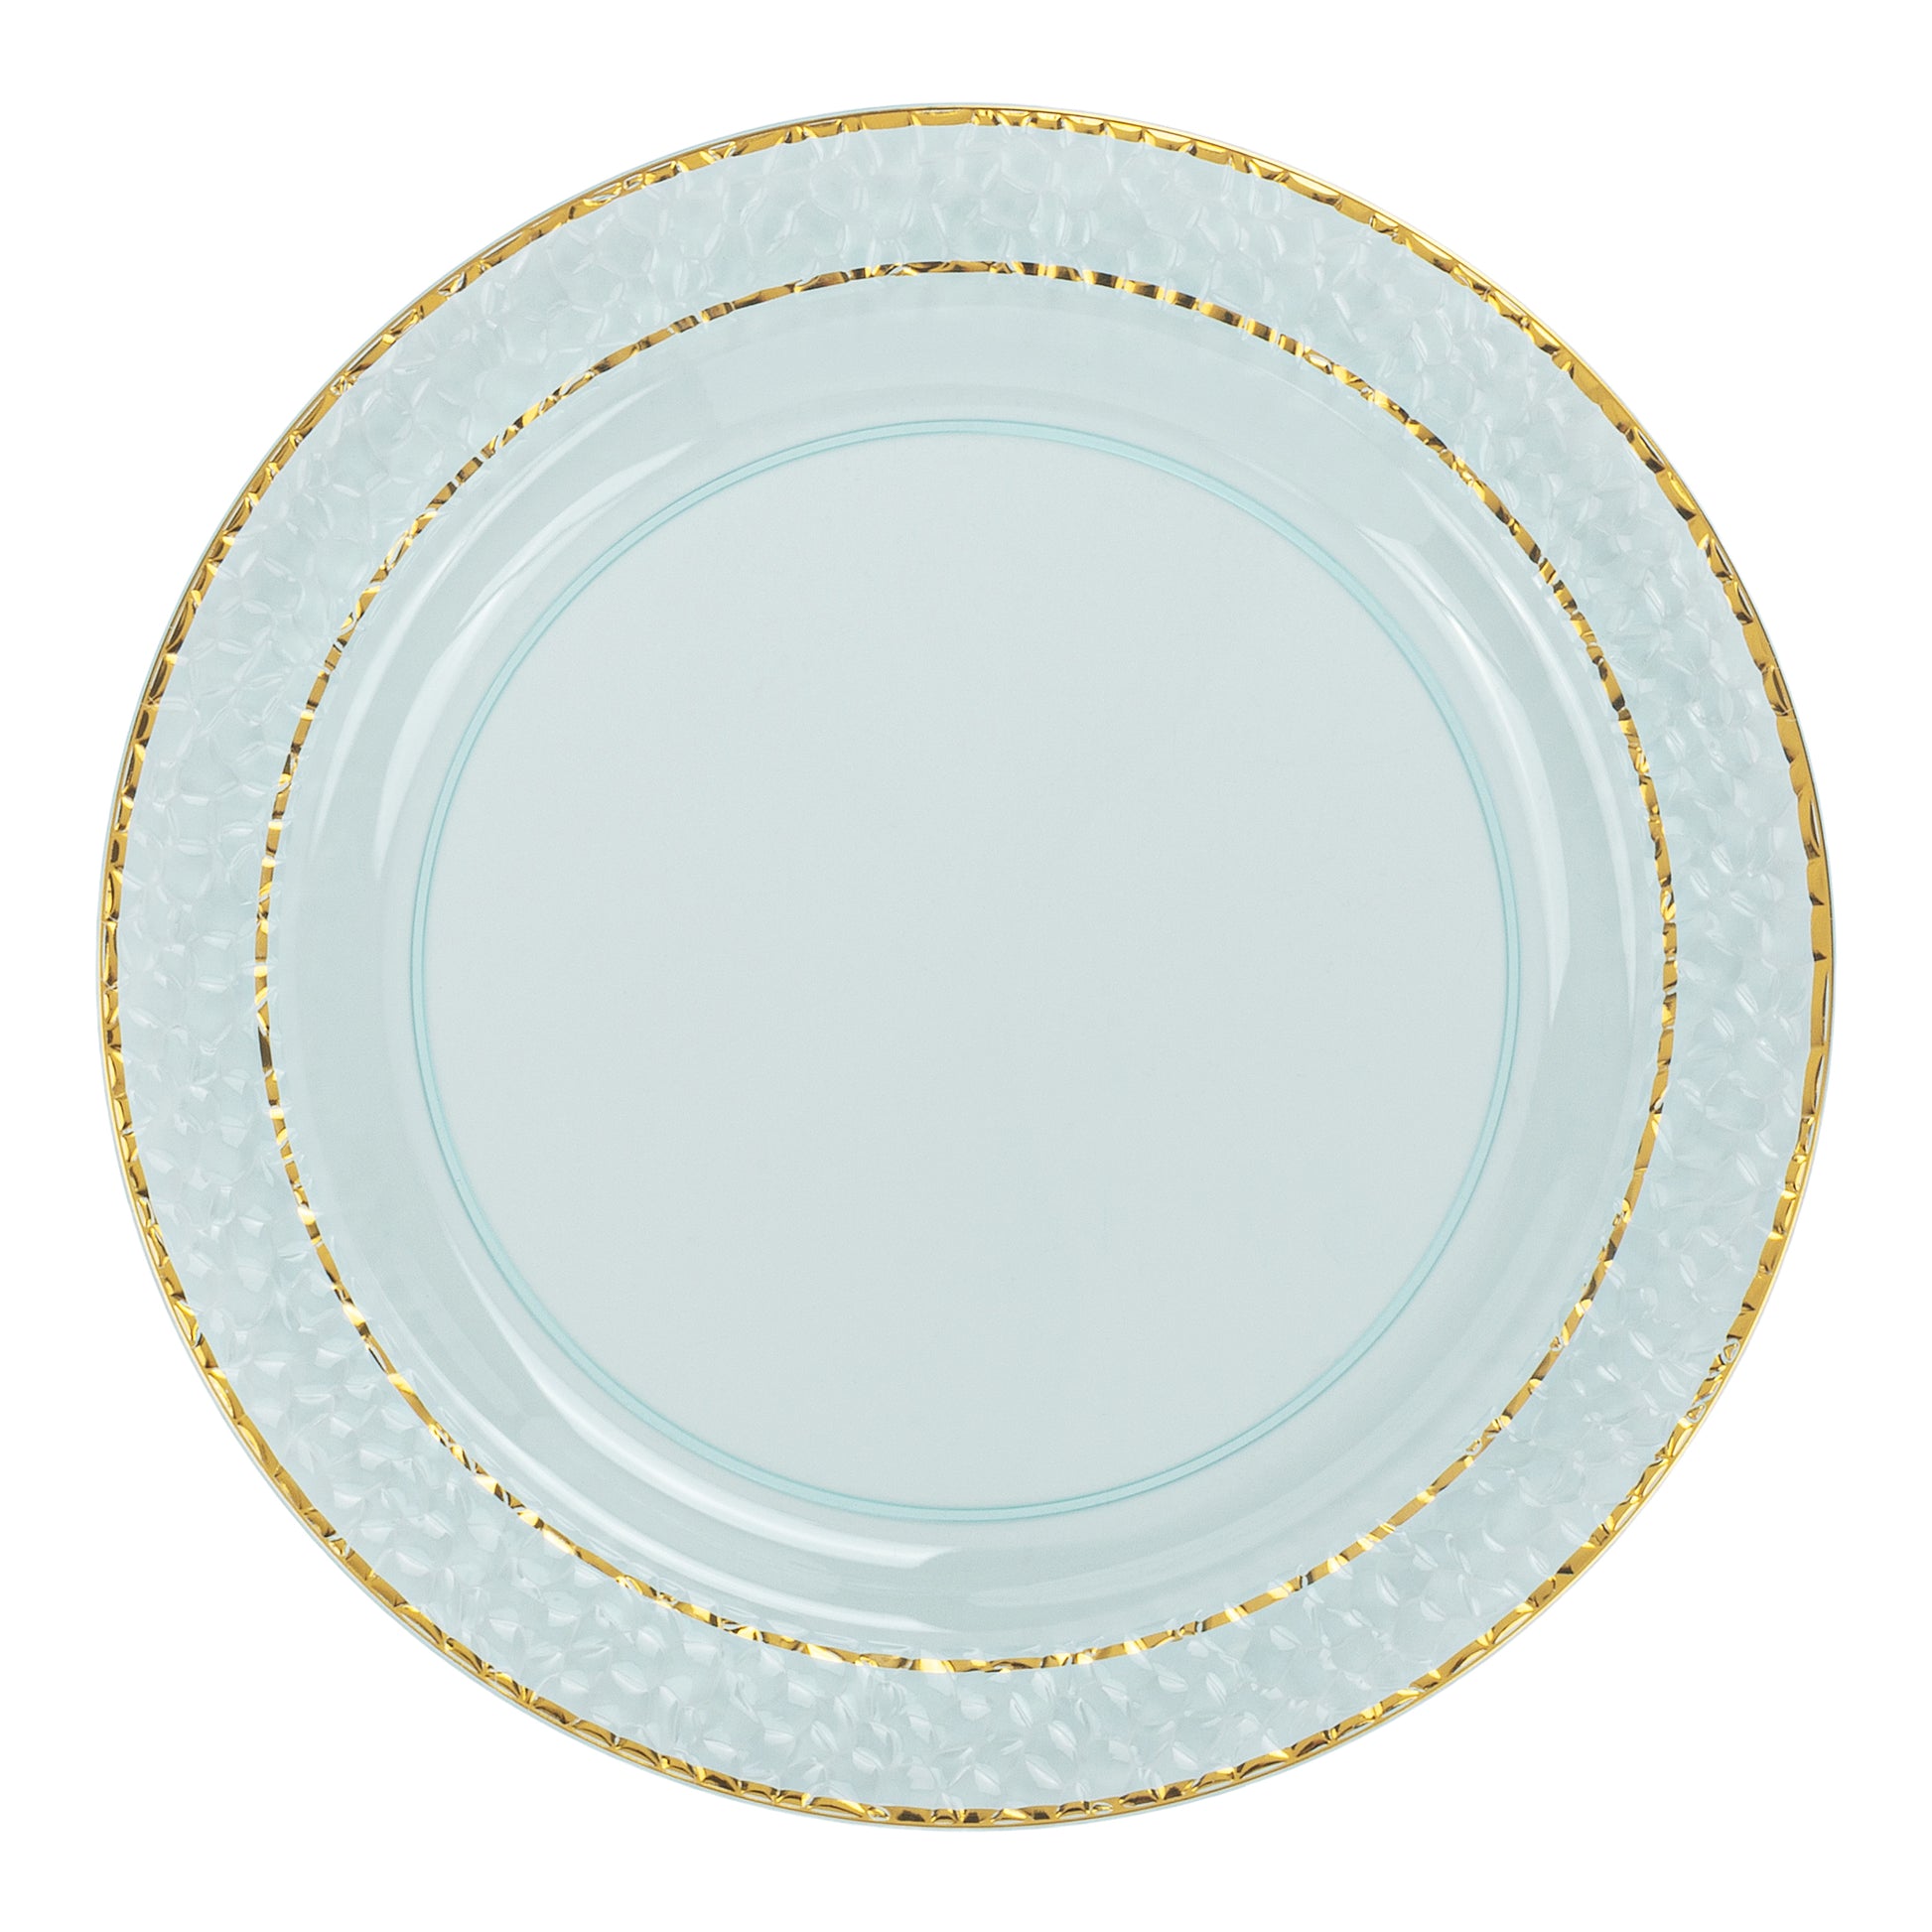 Hammered Disposable Plastic Plates 40 pcs Combo Pack - Blue Gold-Trimmed